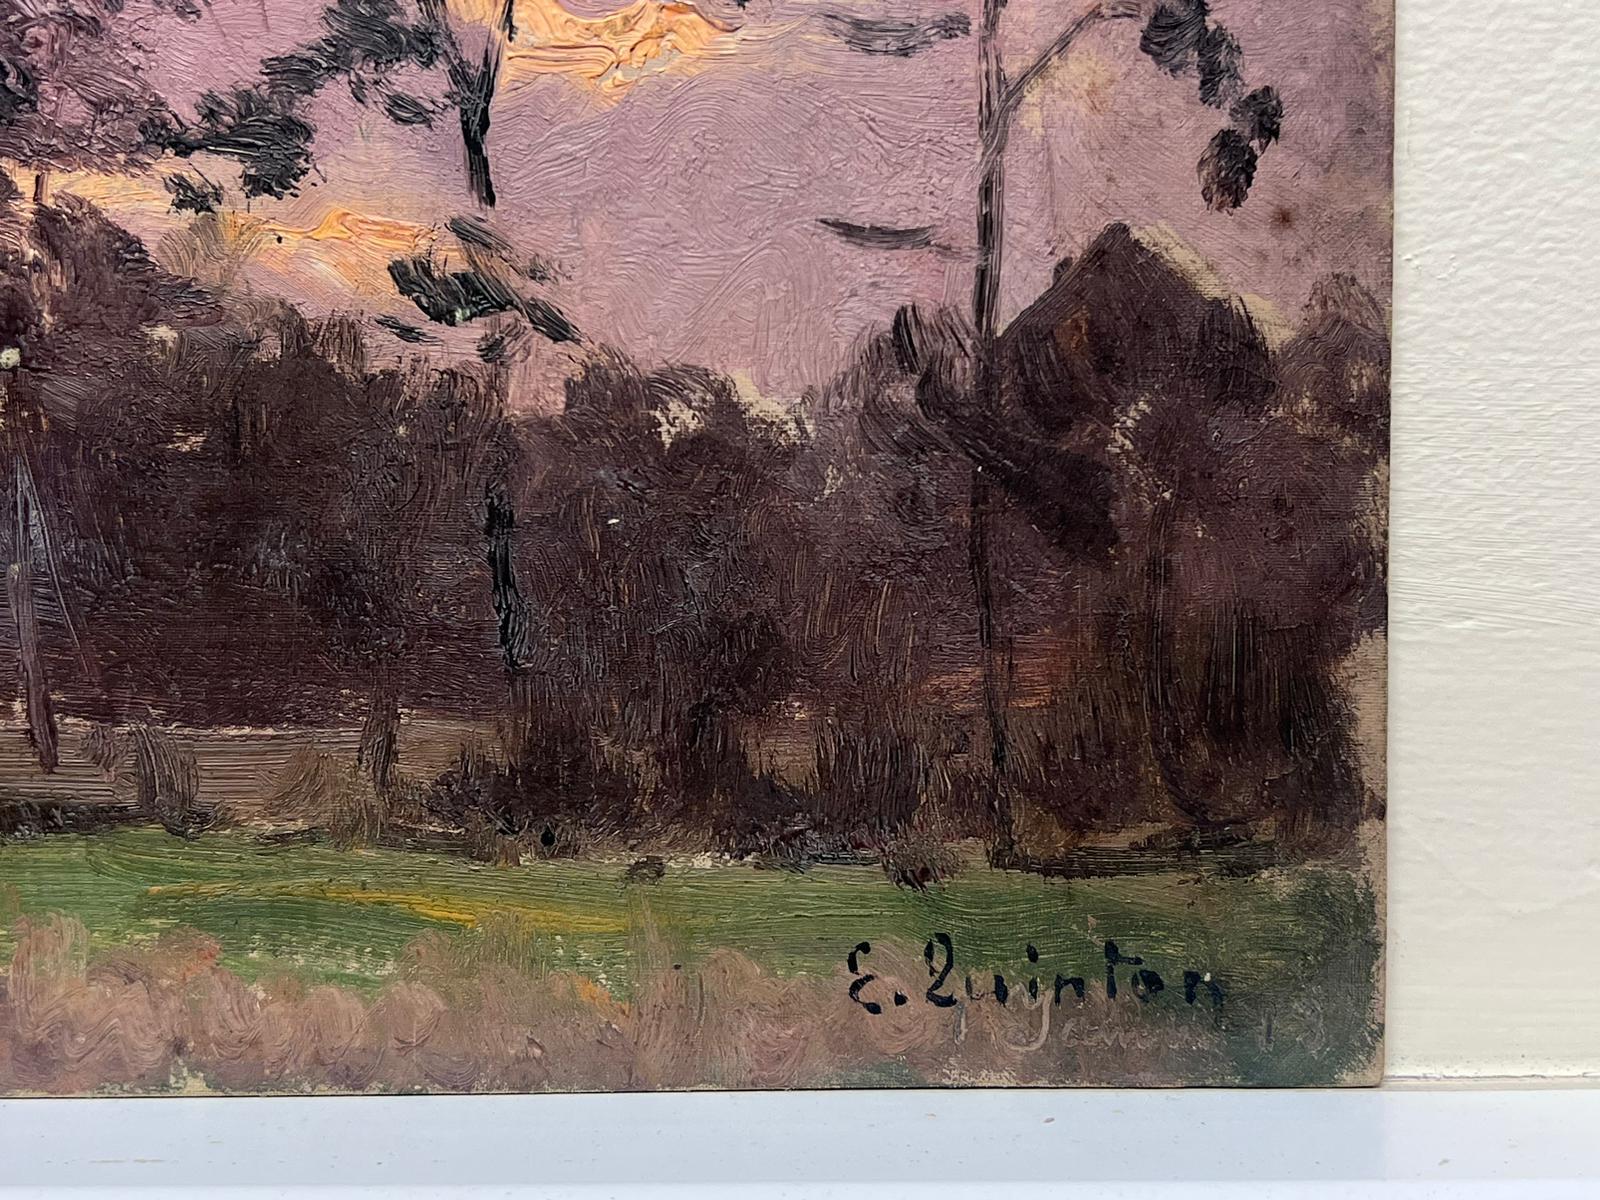 French Countryside Landscape
by Edmond Quinton (French 1892-1969) *see notes below
signed lower front corner
oil painting on board/ panel, unframed
size: 9.25 x 12 inches
condition: overall good and sound, some age related marks and old dirt, all